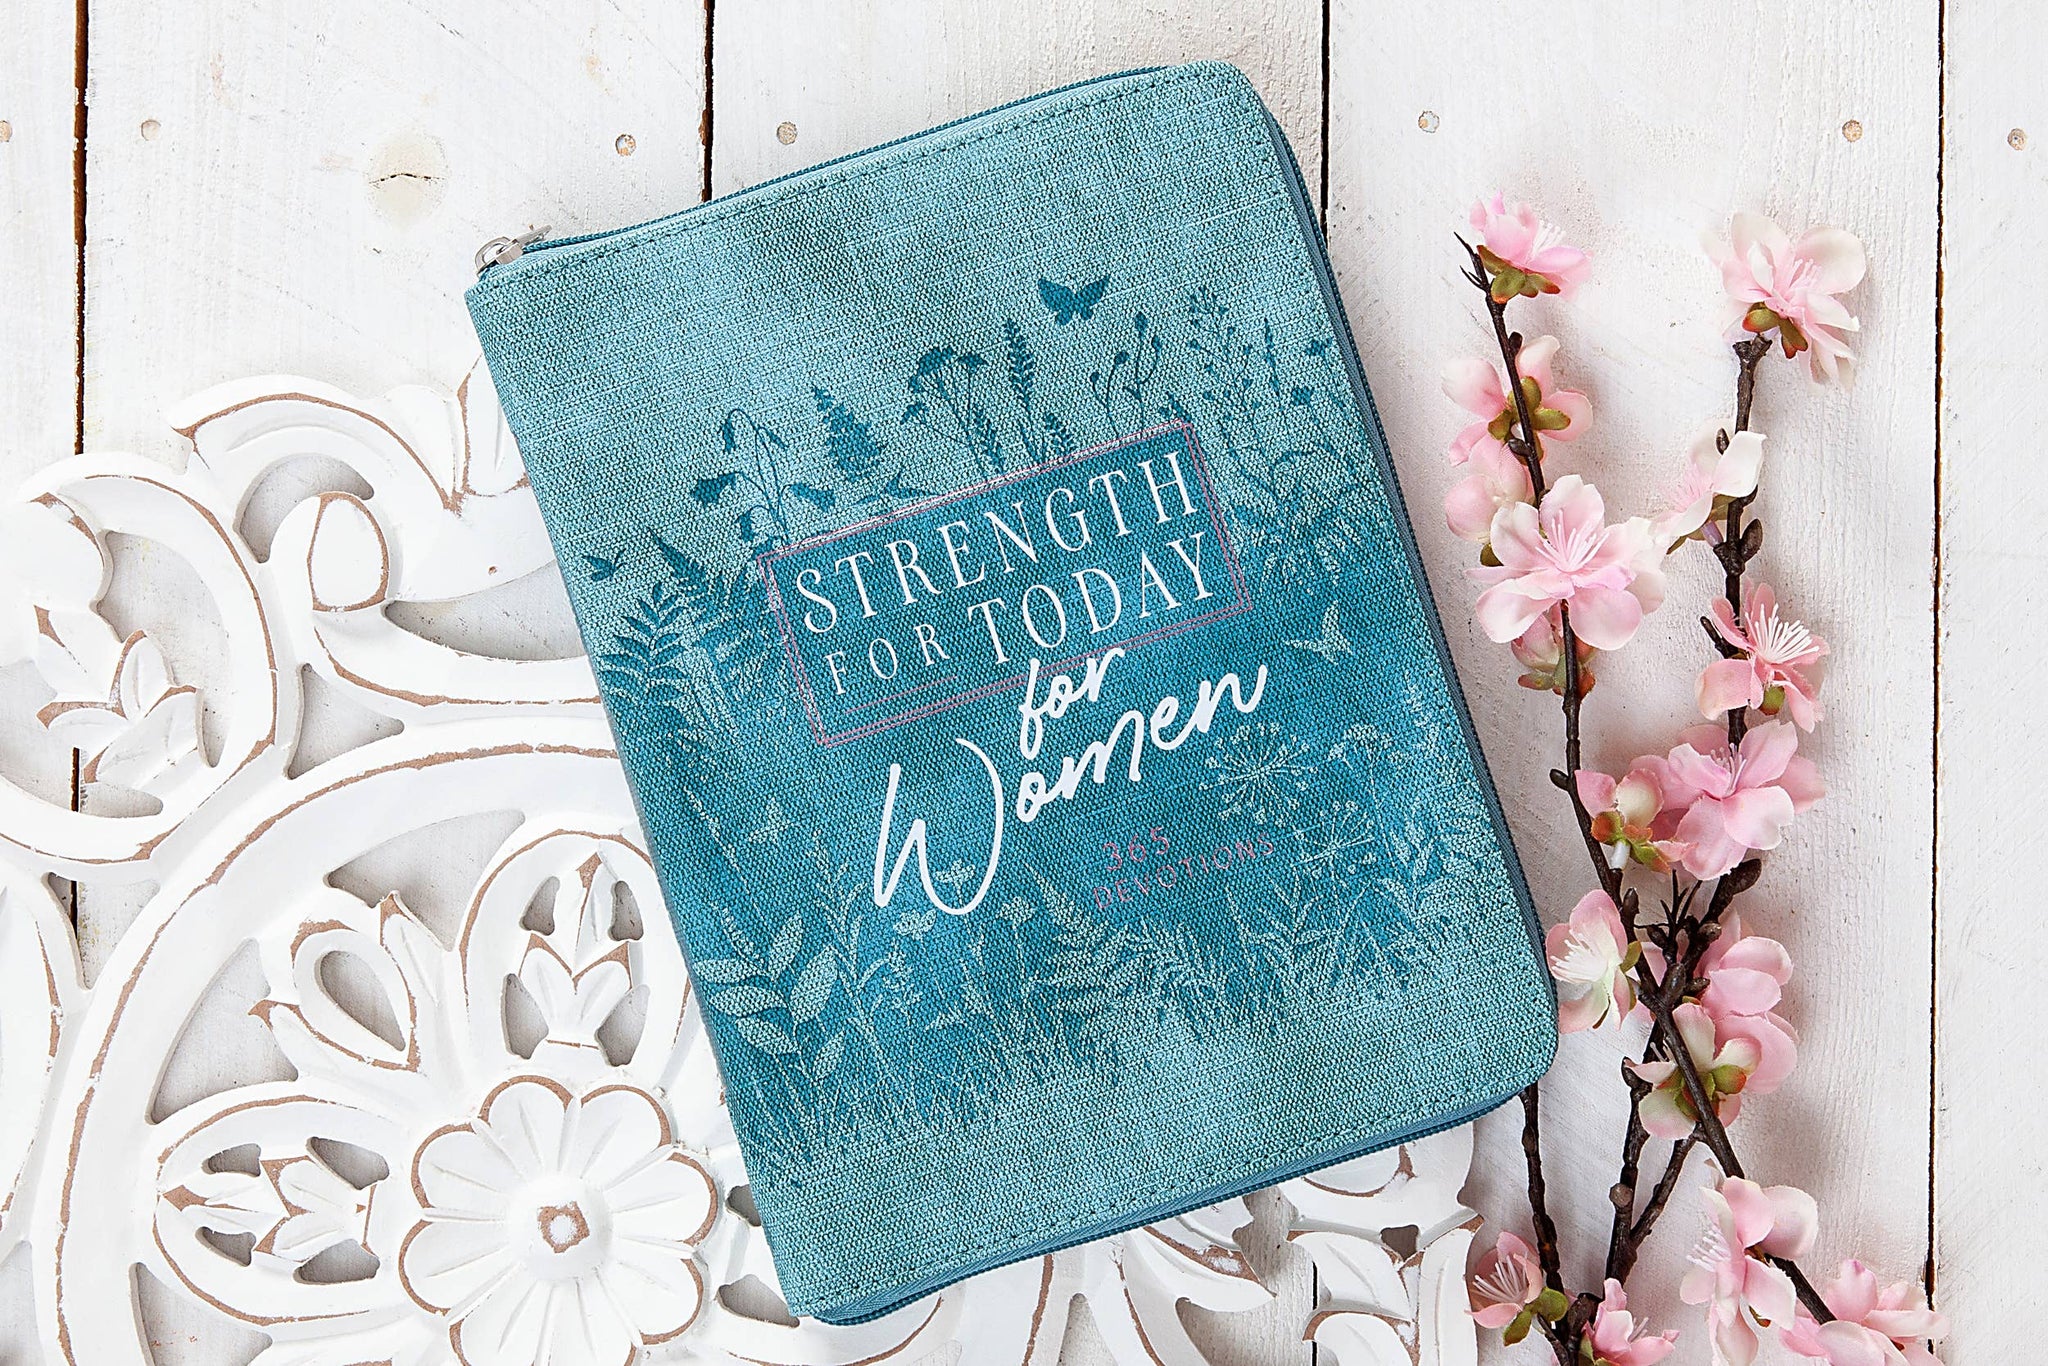 Strength for Today for Women (Mother's Day Gifts - Devo)